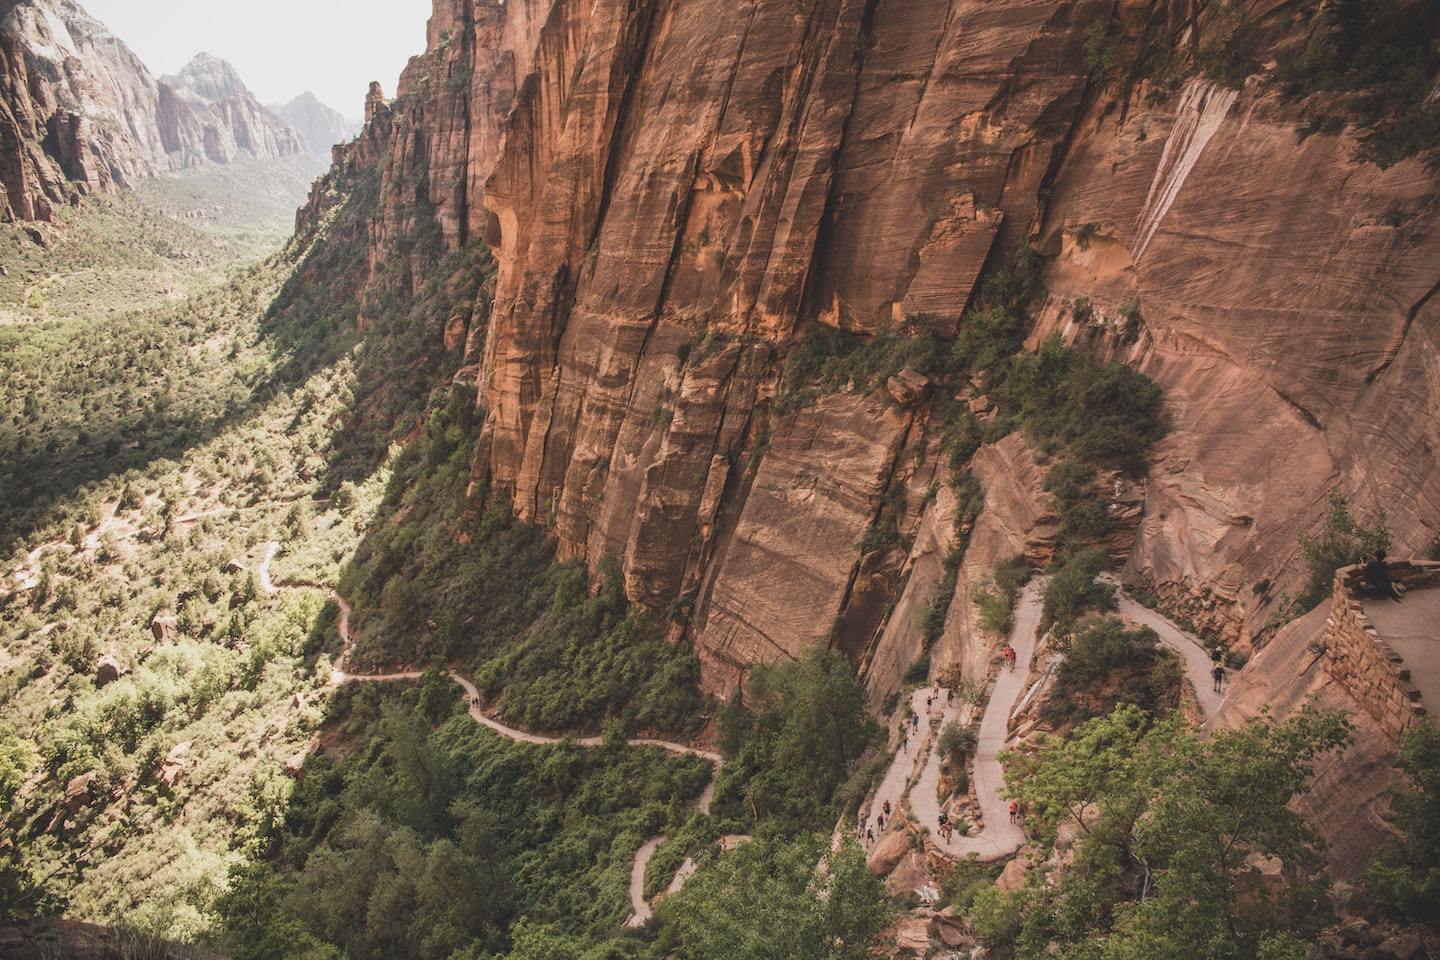 angel's landing, the most famous hike in zion national park